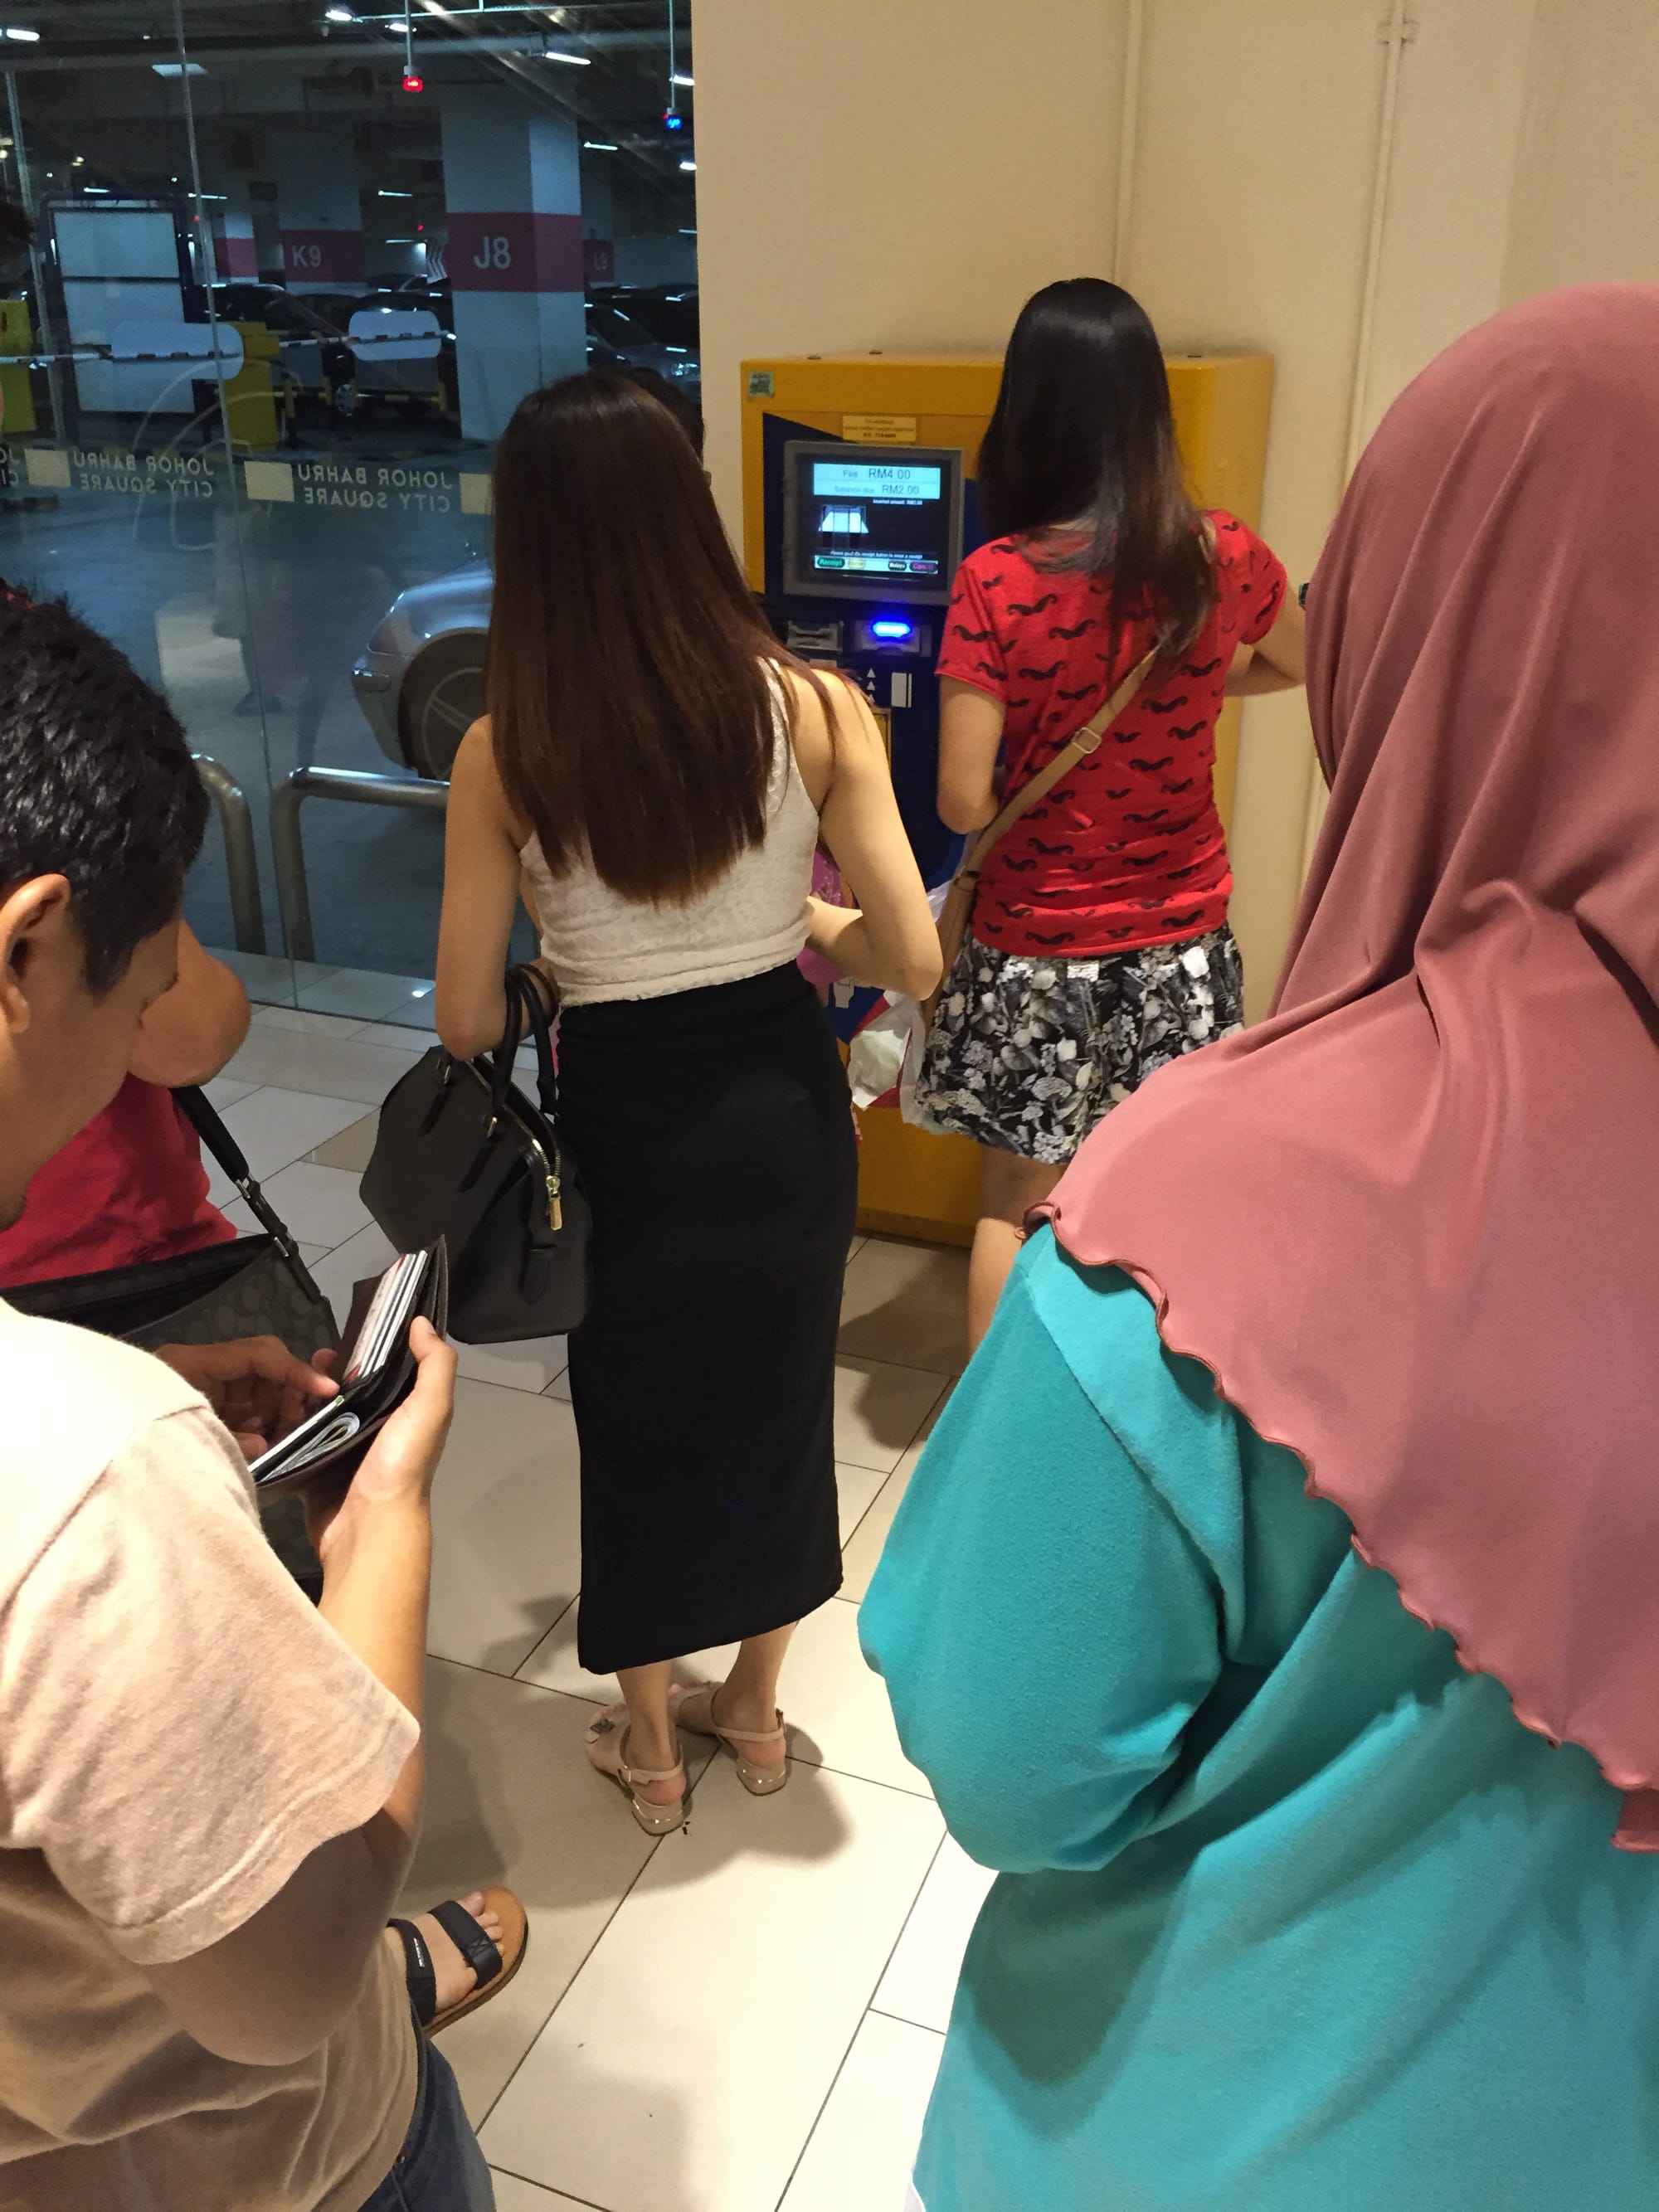 Photo by Author — queuing to pay for parking — Johor Bahru City Square Shopping Mall